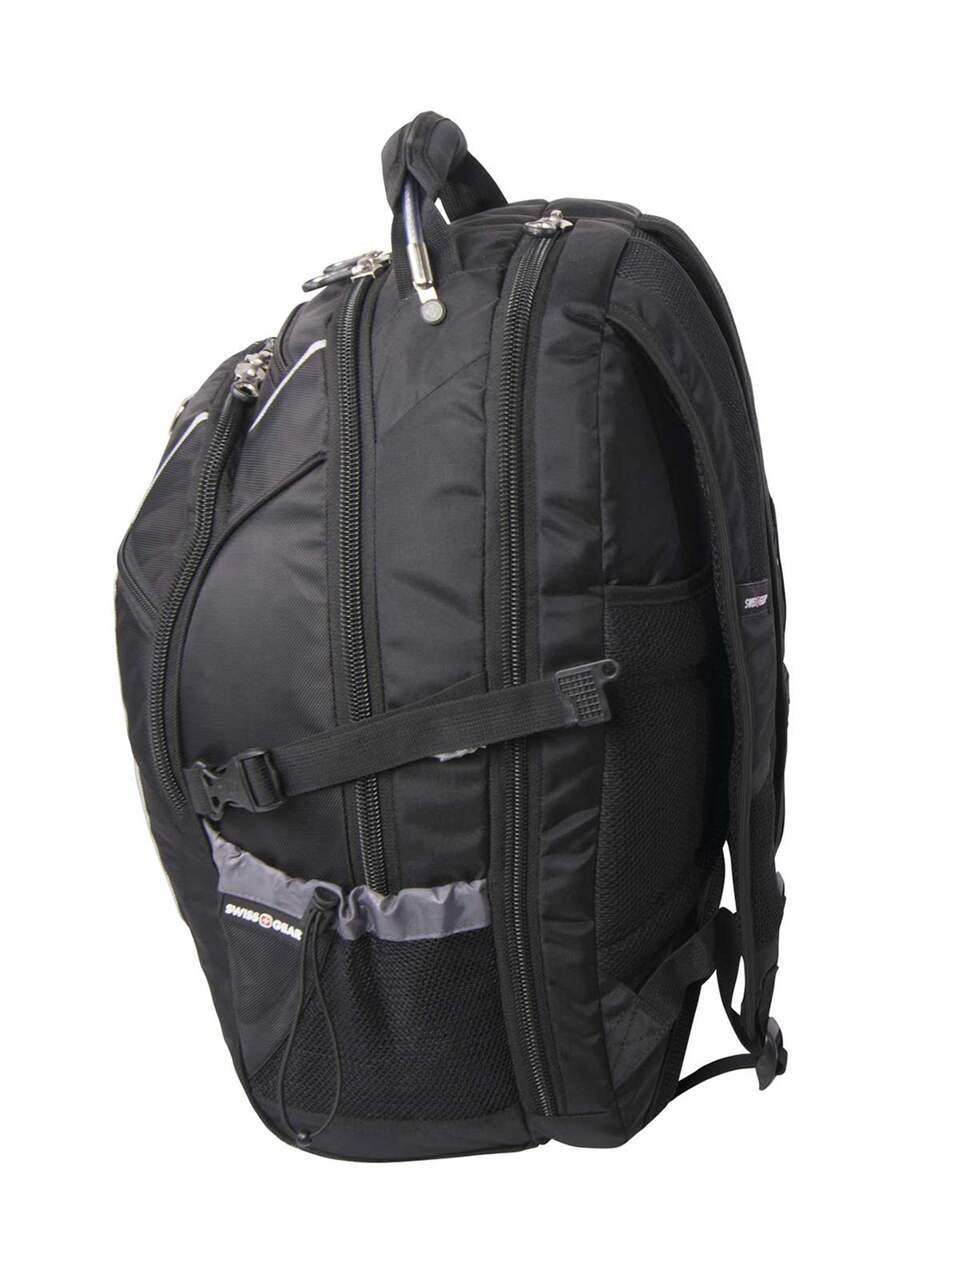 https://media-www.canadiantire.ca/product/playing/camping/backpacks-luggage-accessories/0760625/swiss-gear-executive-laptop-pack-6f8b1f27-2c44-4746-990f-ae76fc2d619e-jpgrendition.jpg?imdensity=1&imwidth=1244&impolicy=mZoom